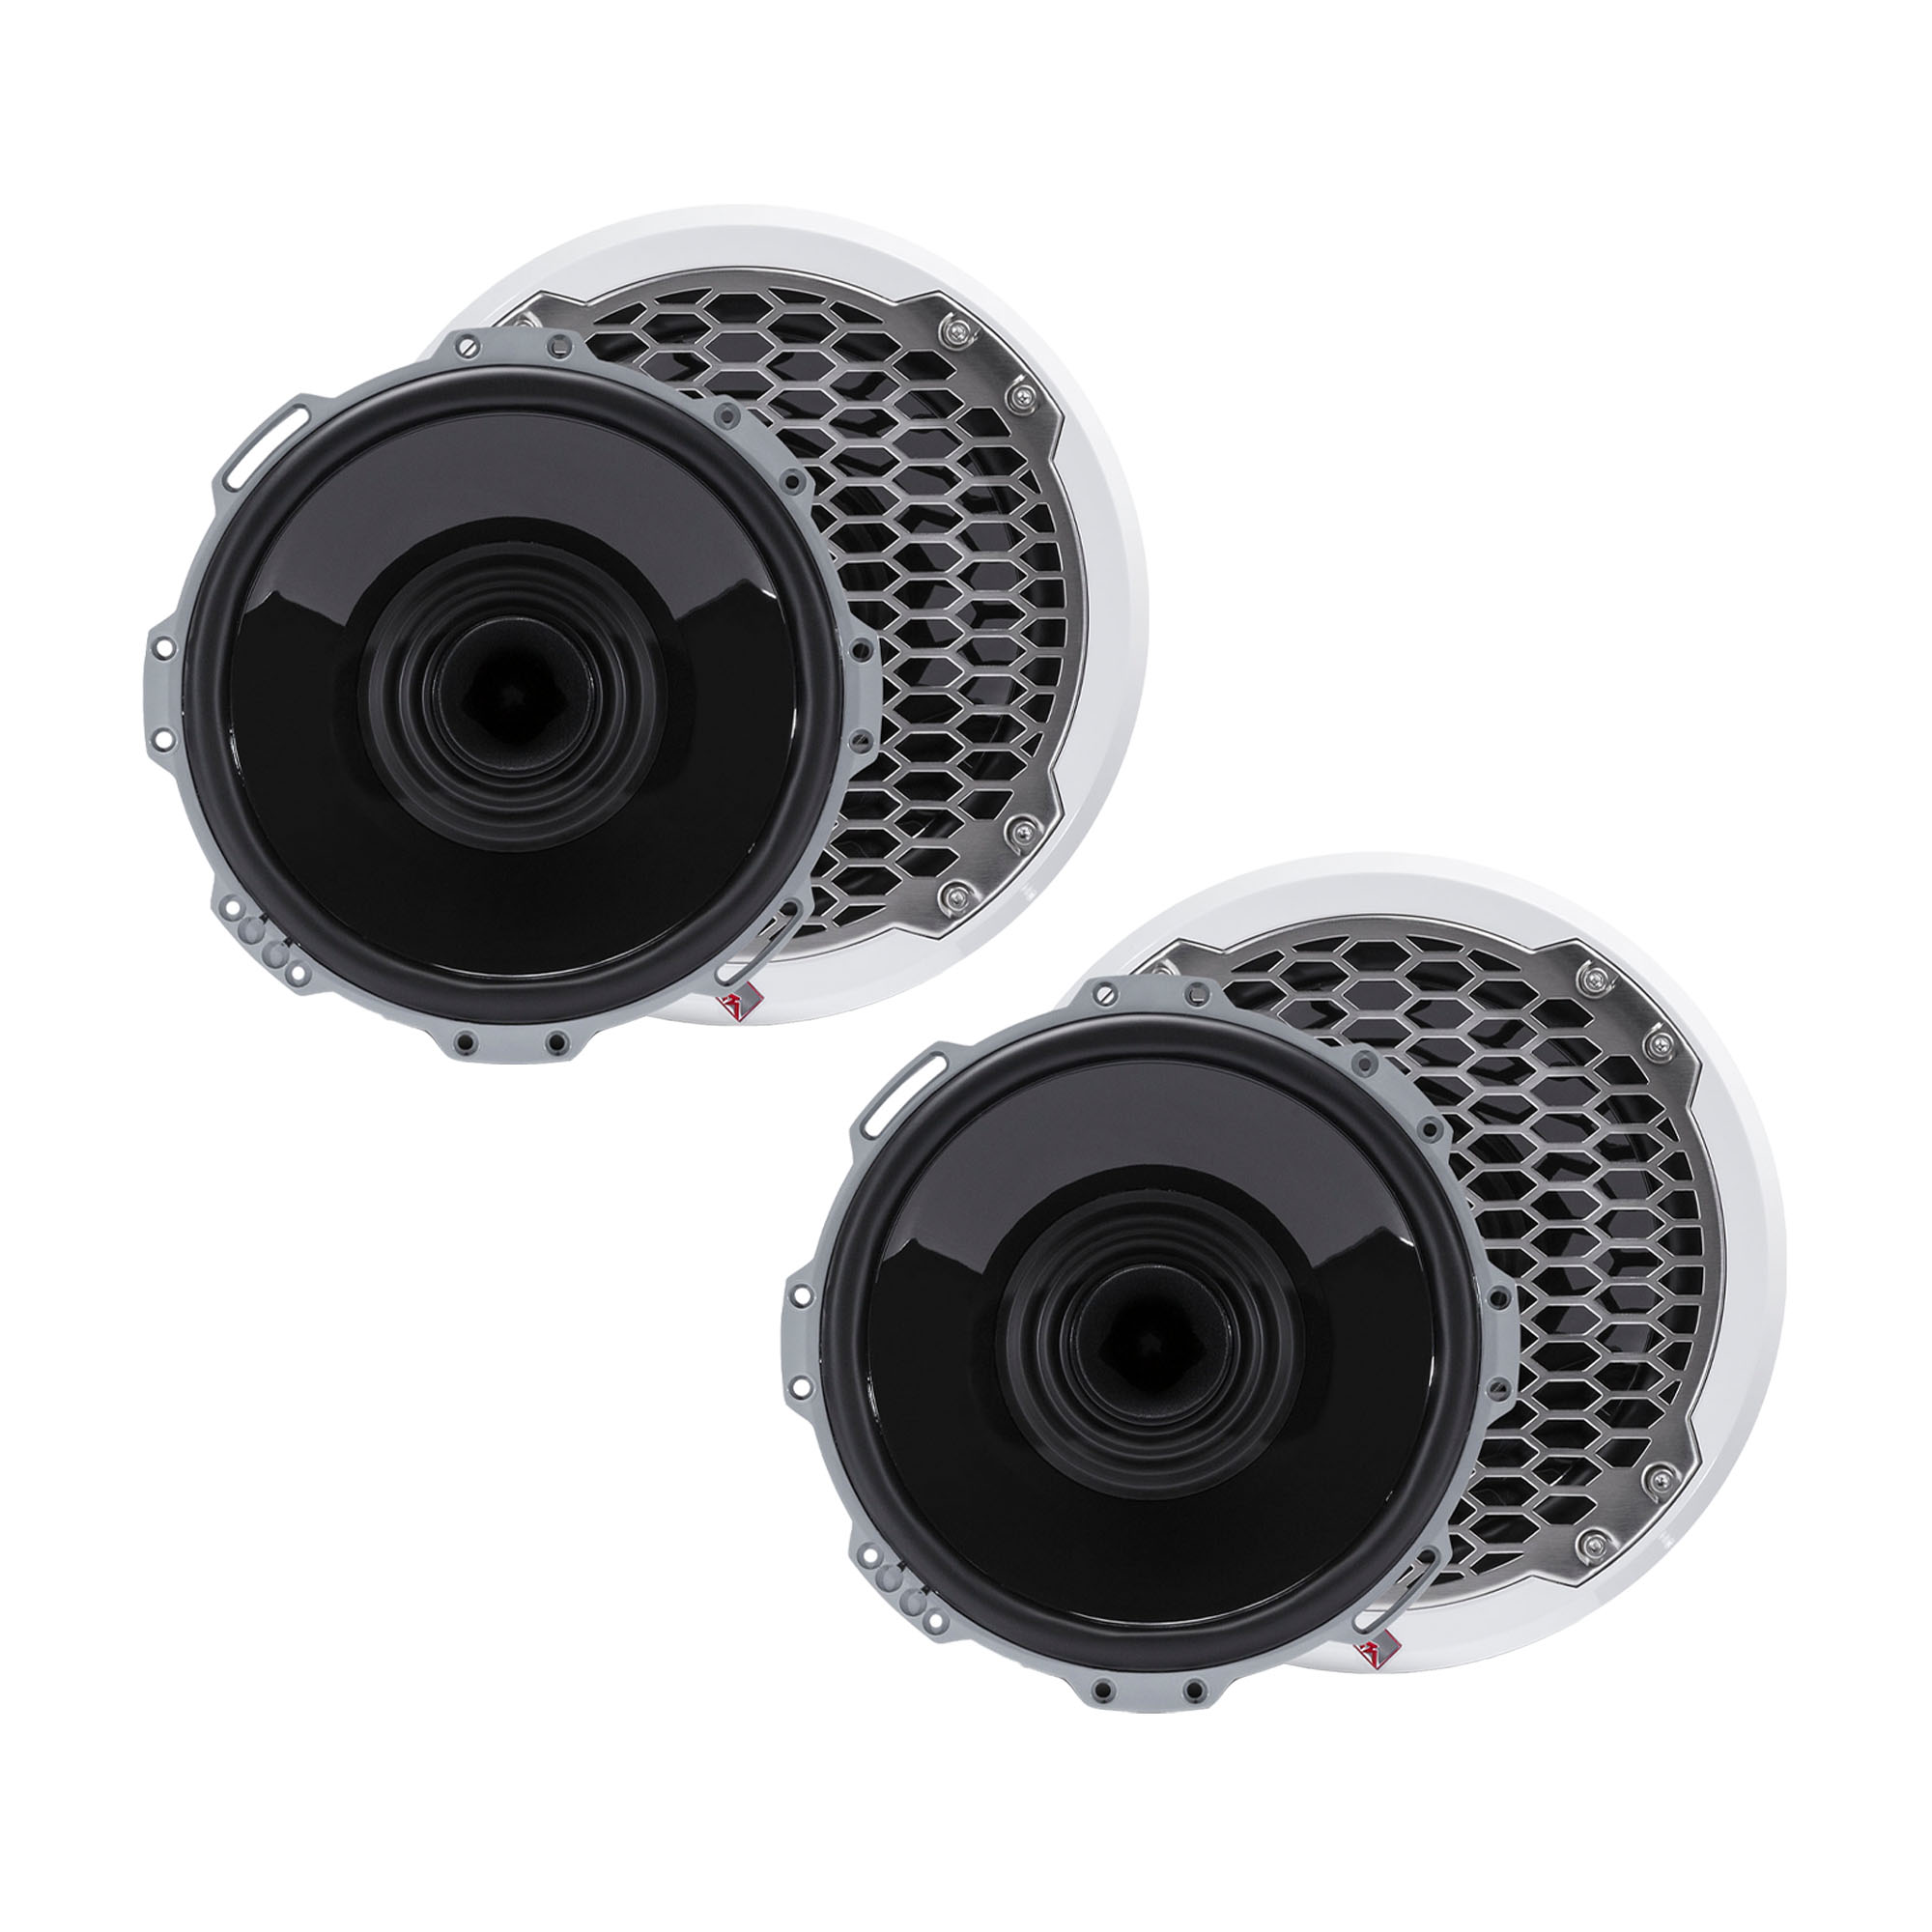 Rockford Fosgate - Two Pairs of PM282H Punch Marine 8" Full Range Speakers w/ Horn Tweeters, 150W RMS / 300W Max, White - image 1 of 7